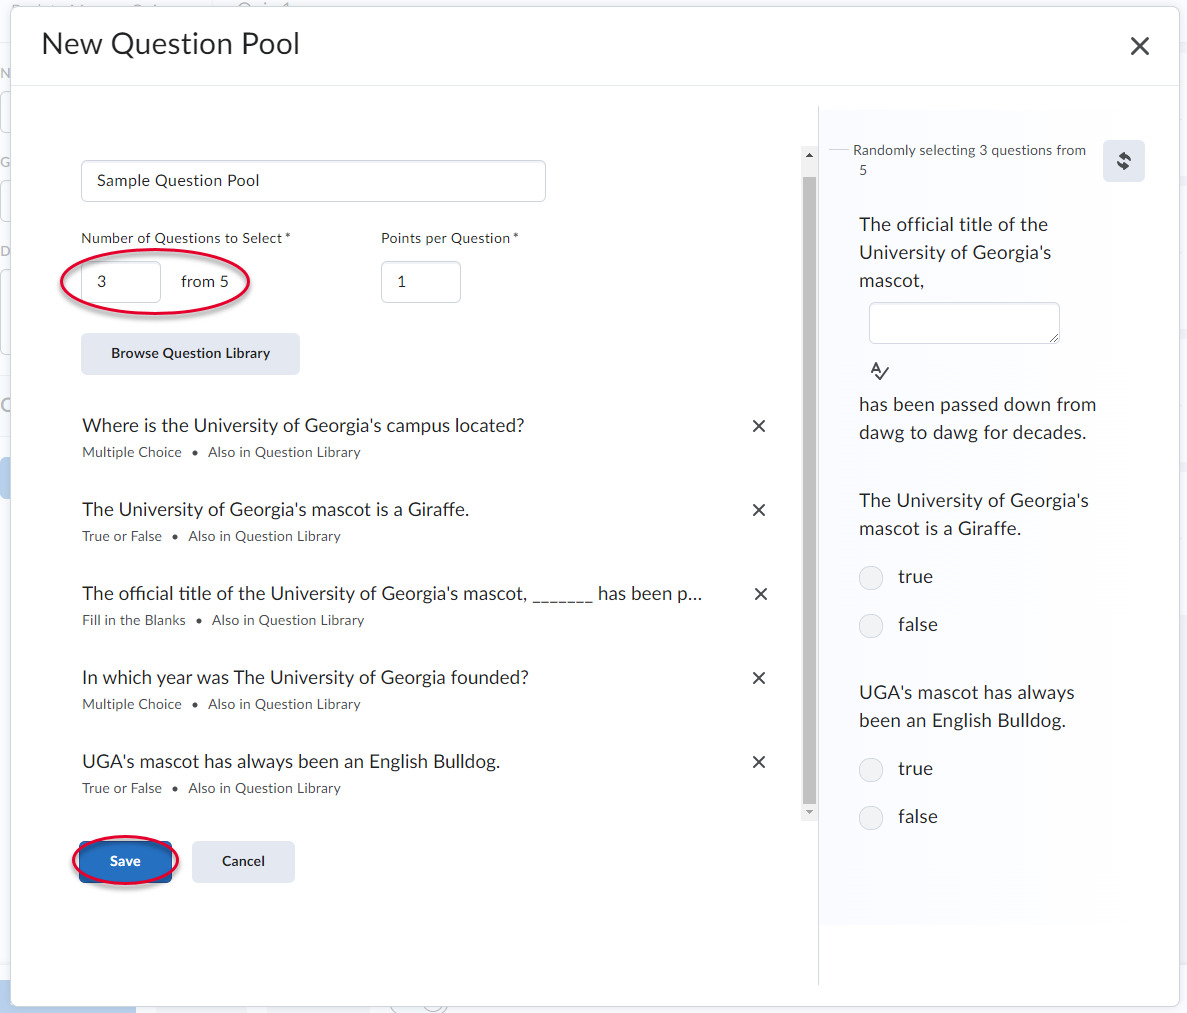 Save question pool changes.